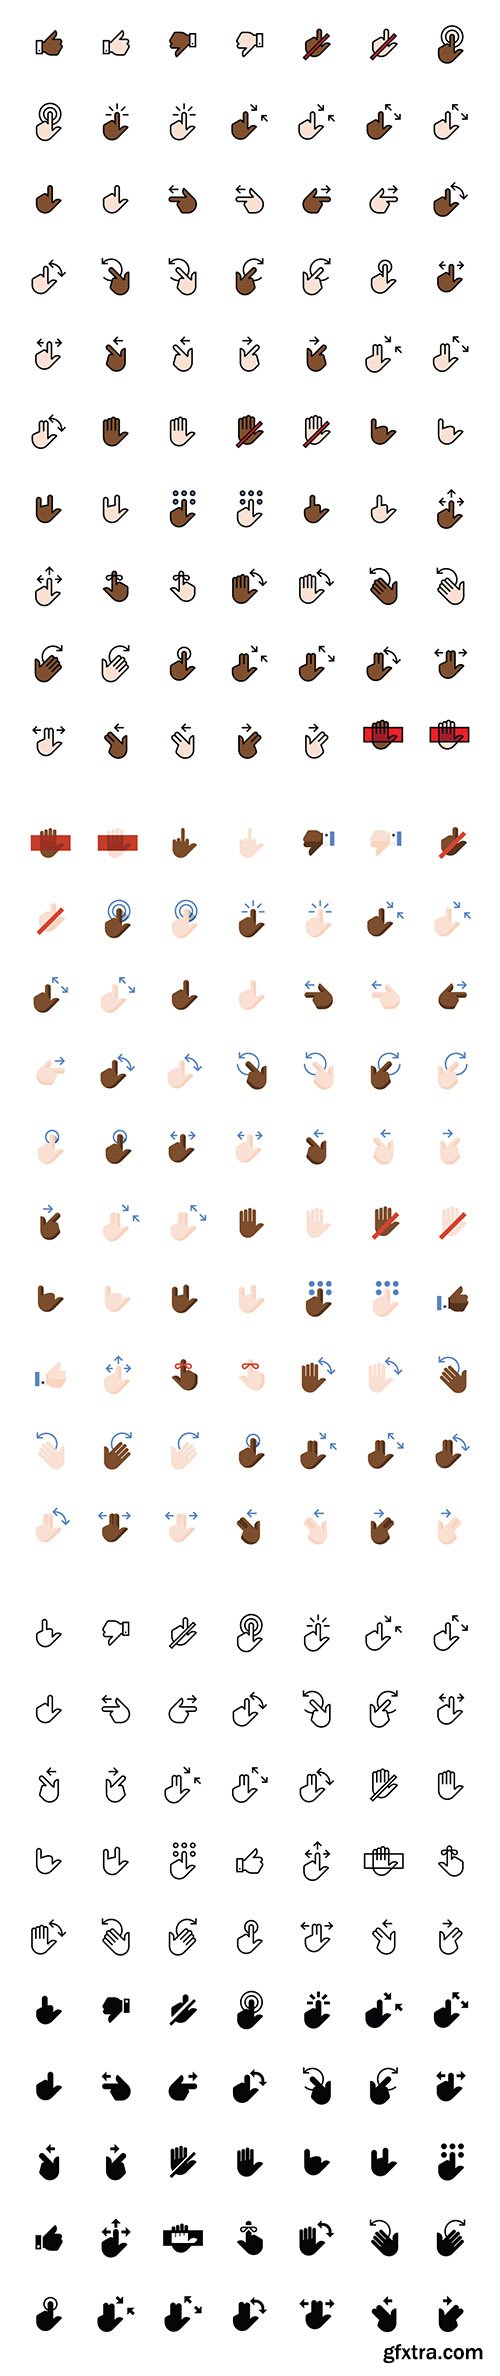 210 Hand Gesture Icons - 210 flat, glyph, line & filled-line style icons